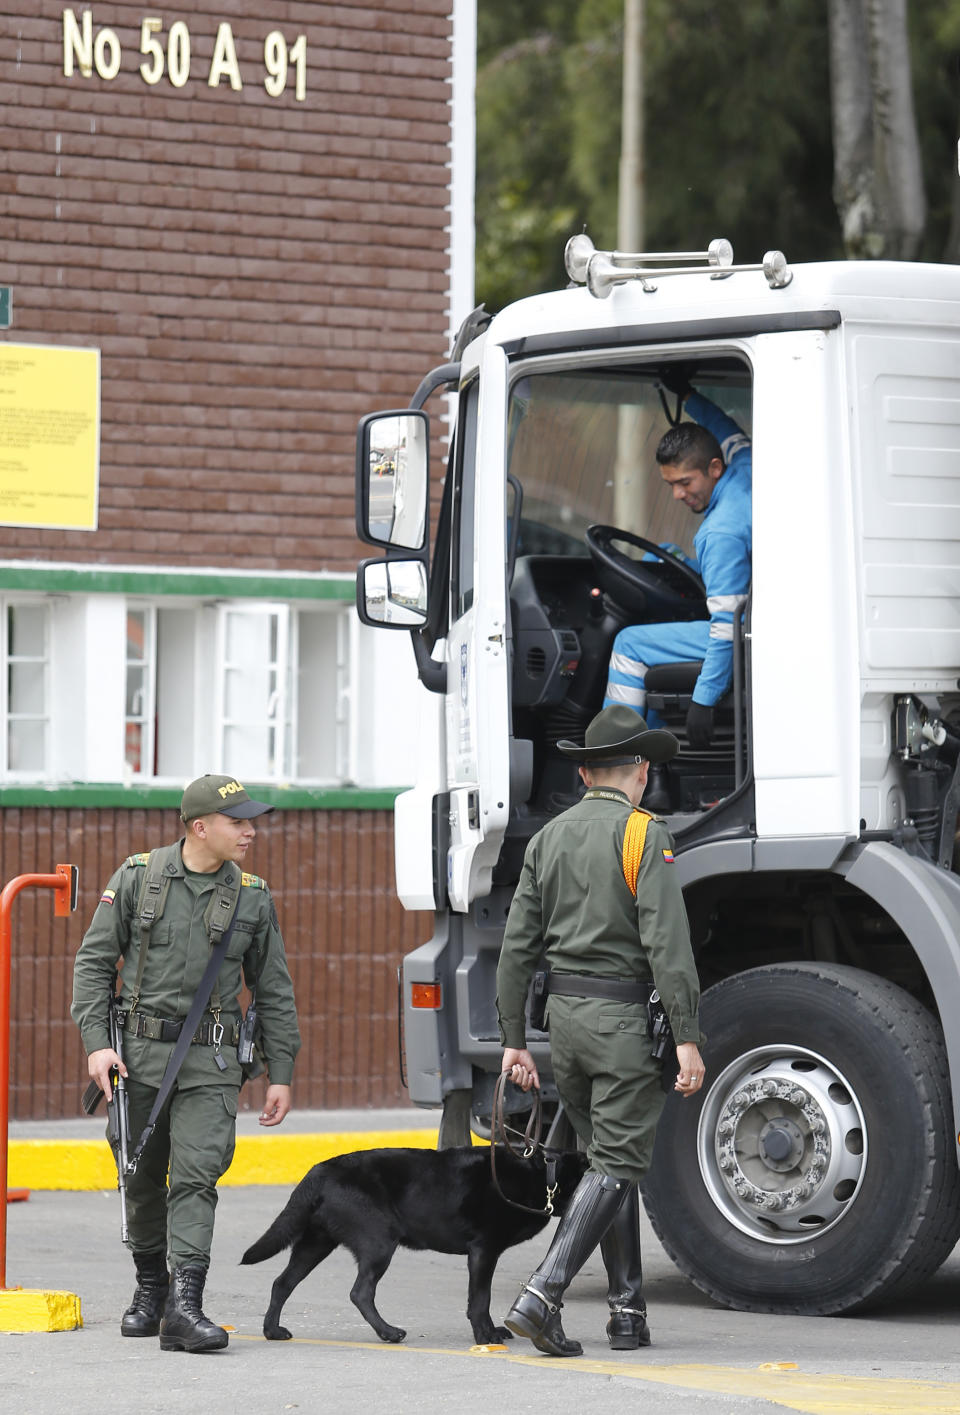 Police inspect a truck outside the General Francisco de Paula Santander Police Academy a day after a car bomb exploded at the site, in Bogota, Colombia, Friday, Jan. 18, 2019. Colombia blames the National Liberation Army, ELN, rebels for the deadly attack that left more than 20 dead and wounded many others. (AP Photo/John Wilson Vizcaino)